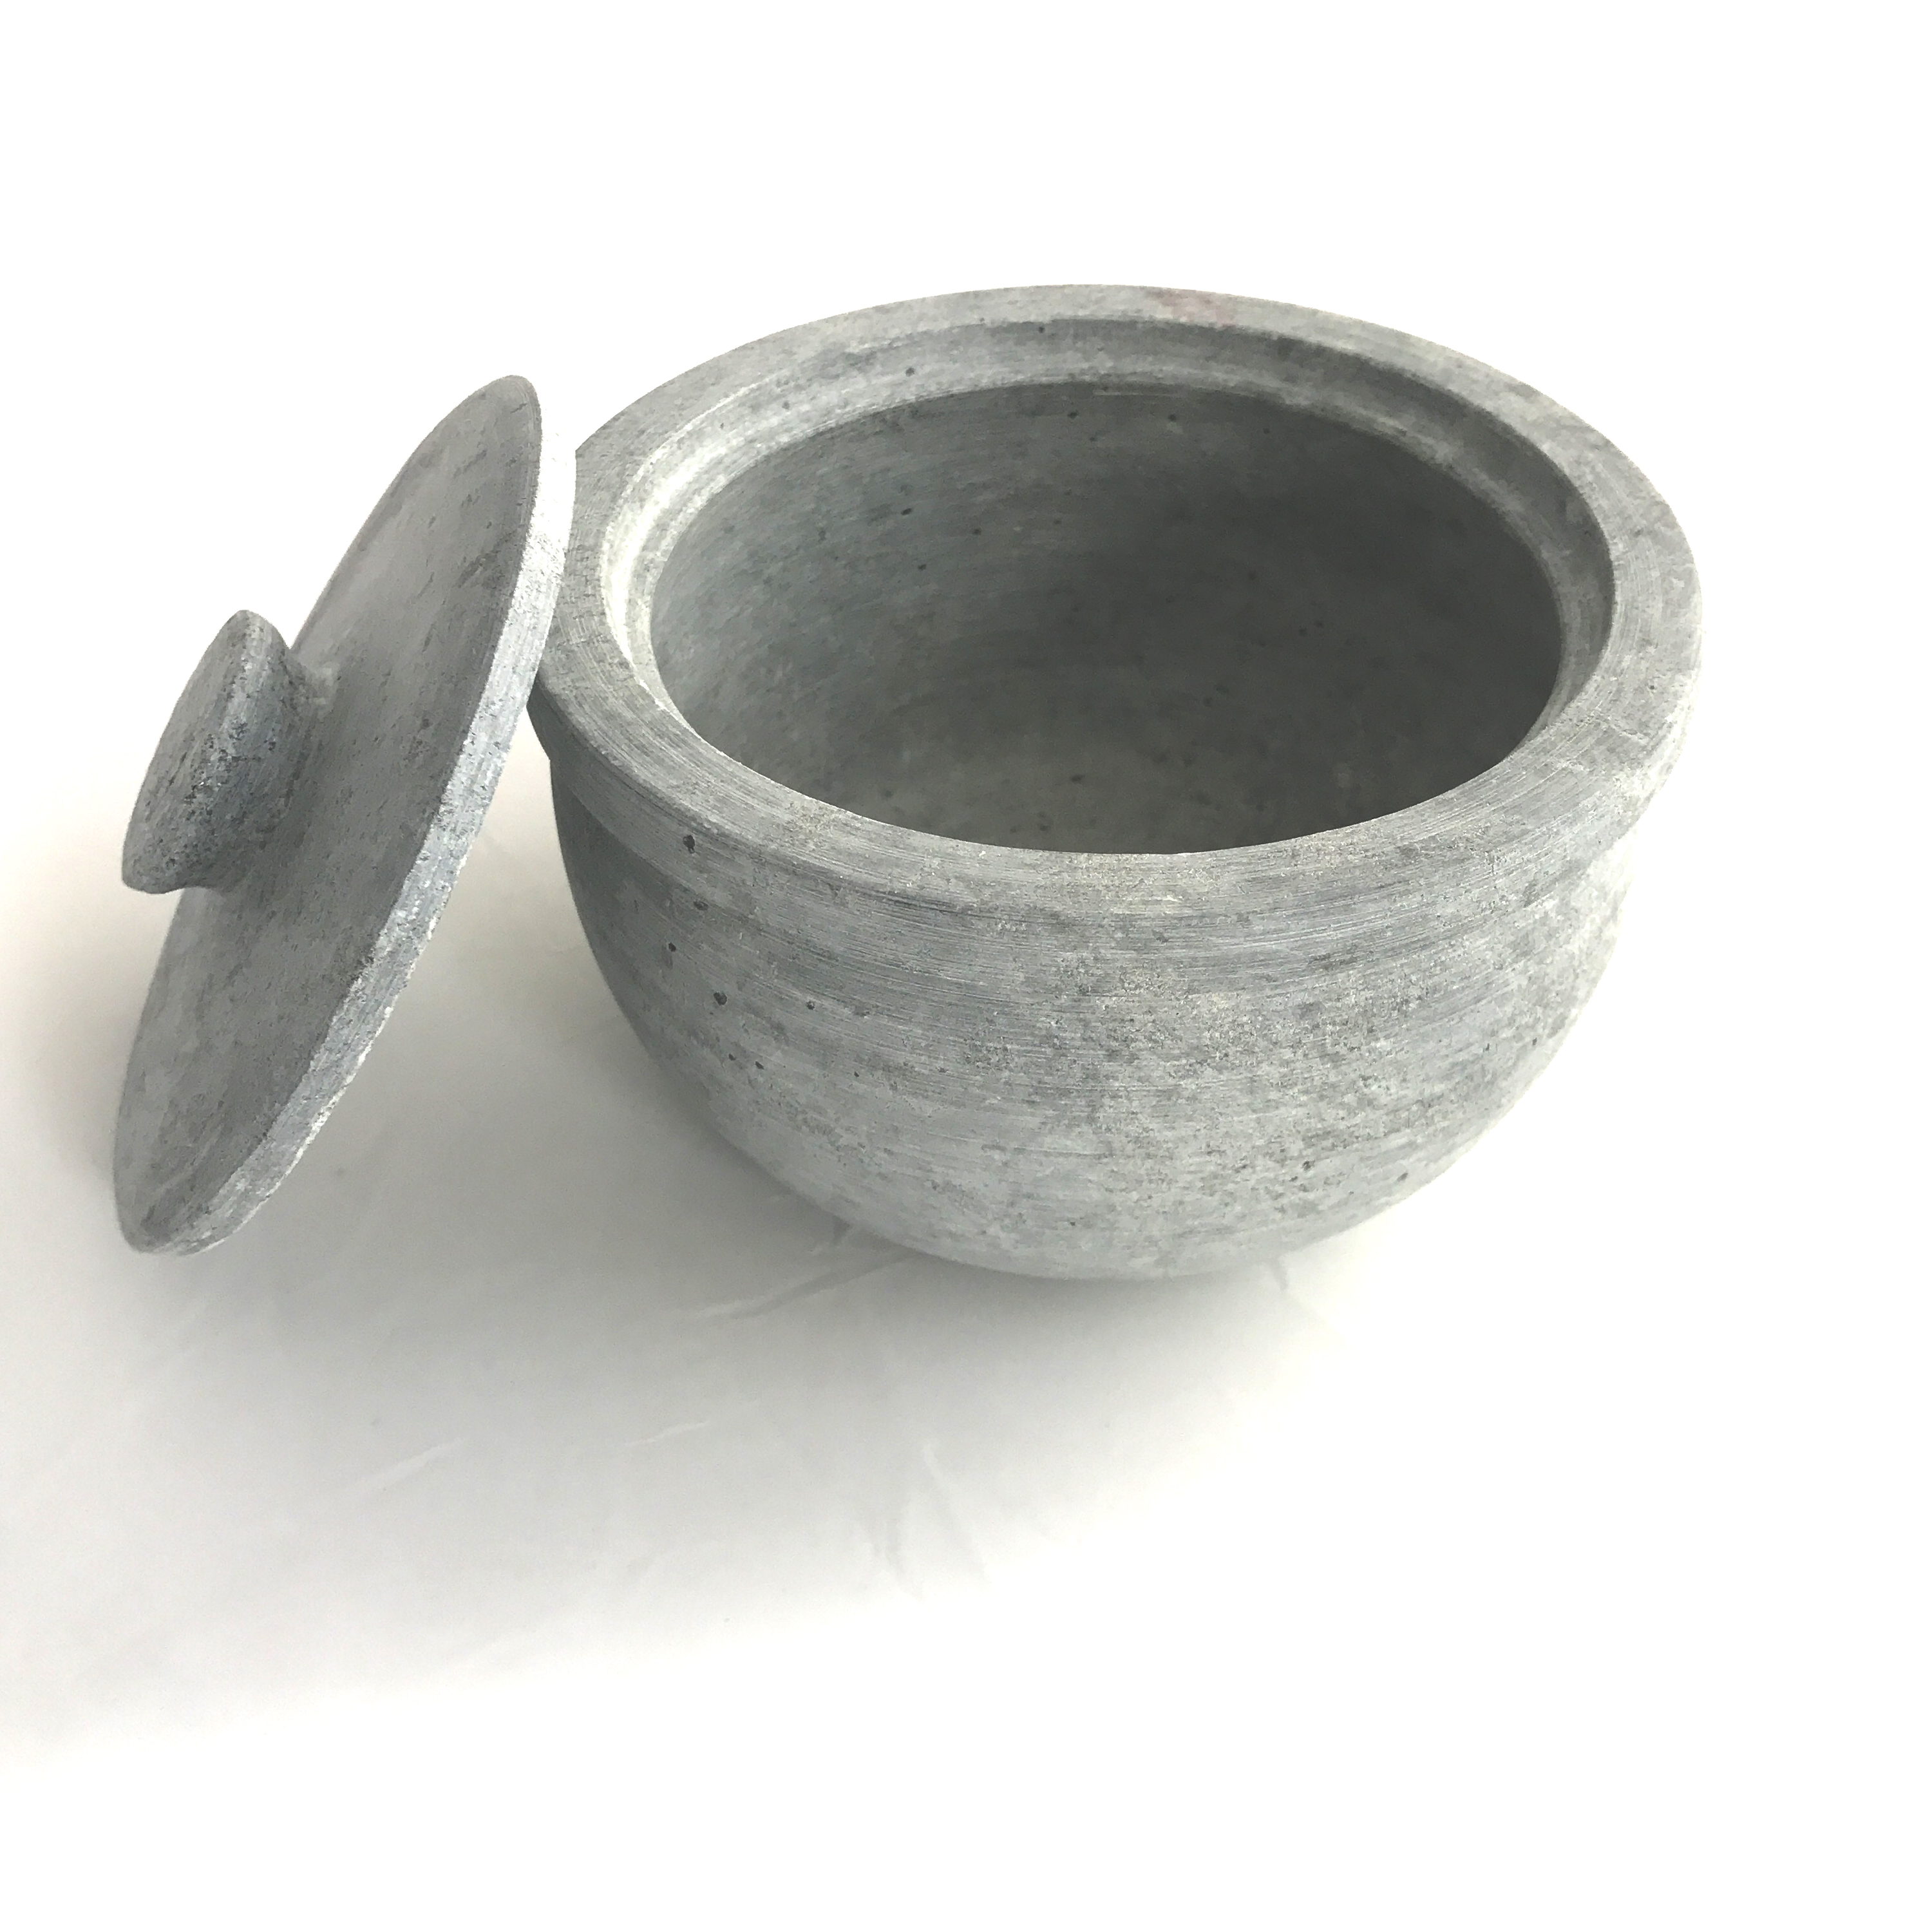 Indian Soapstone Pot - Small